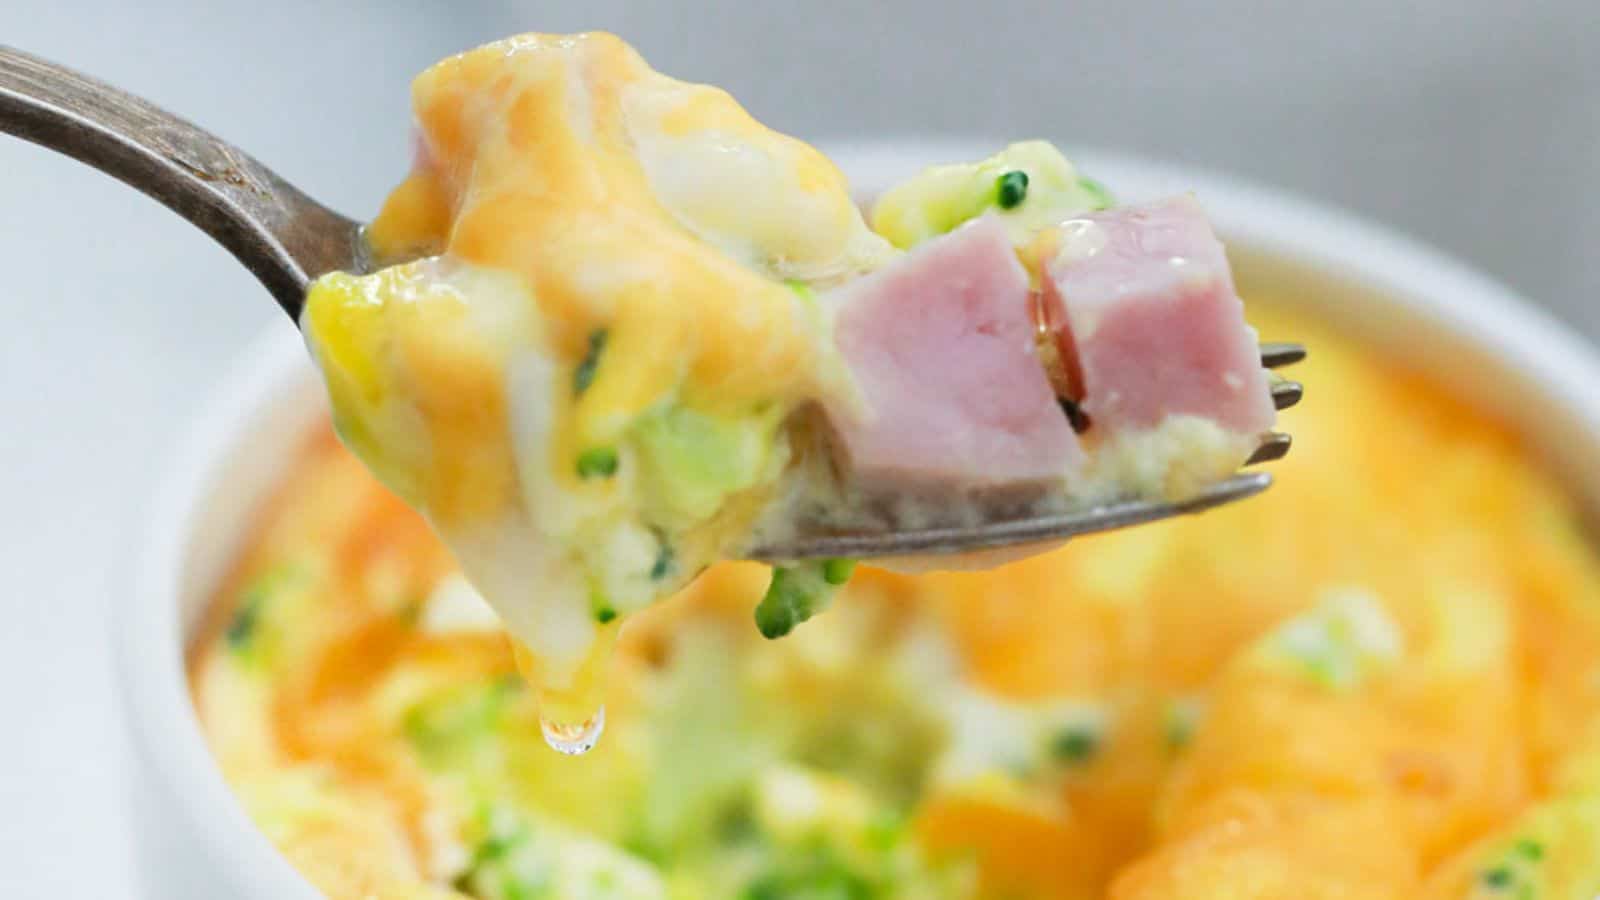 A fork holding a bite of mini frittata with ham and broccoli, with the dish in the background.